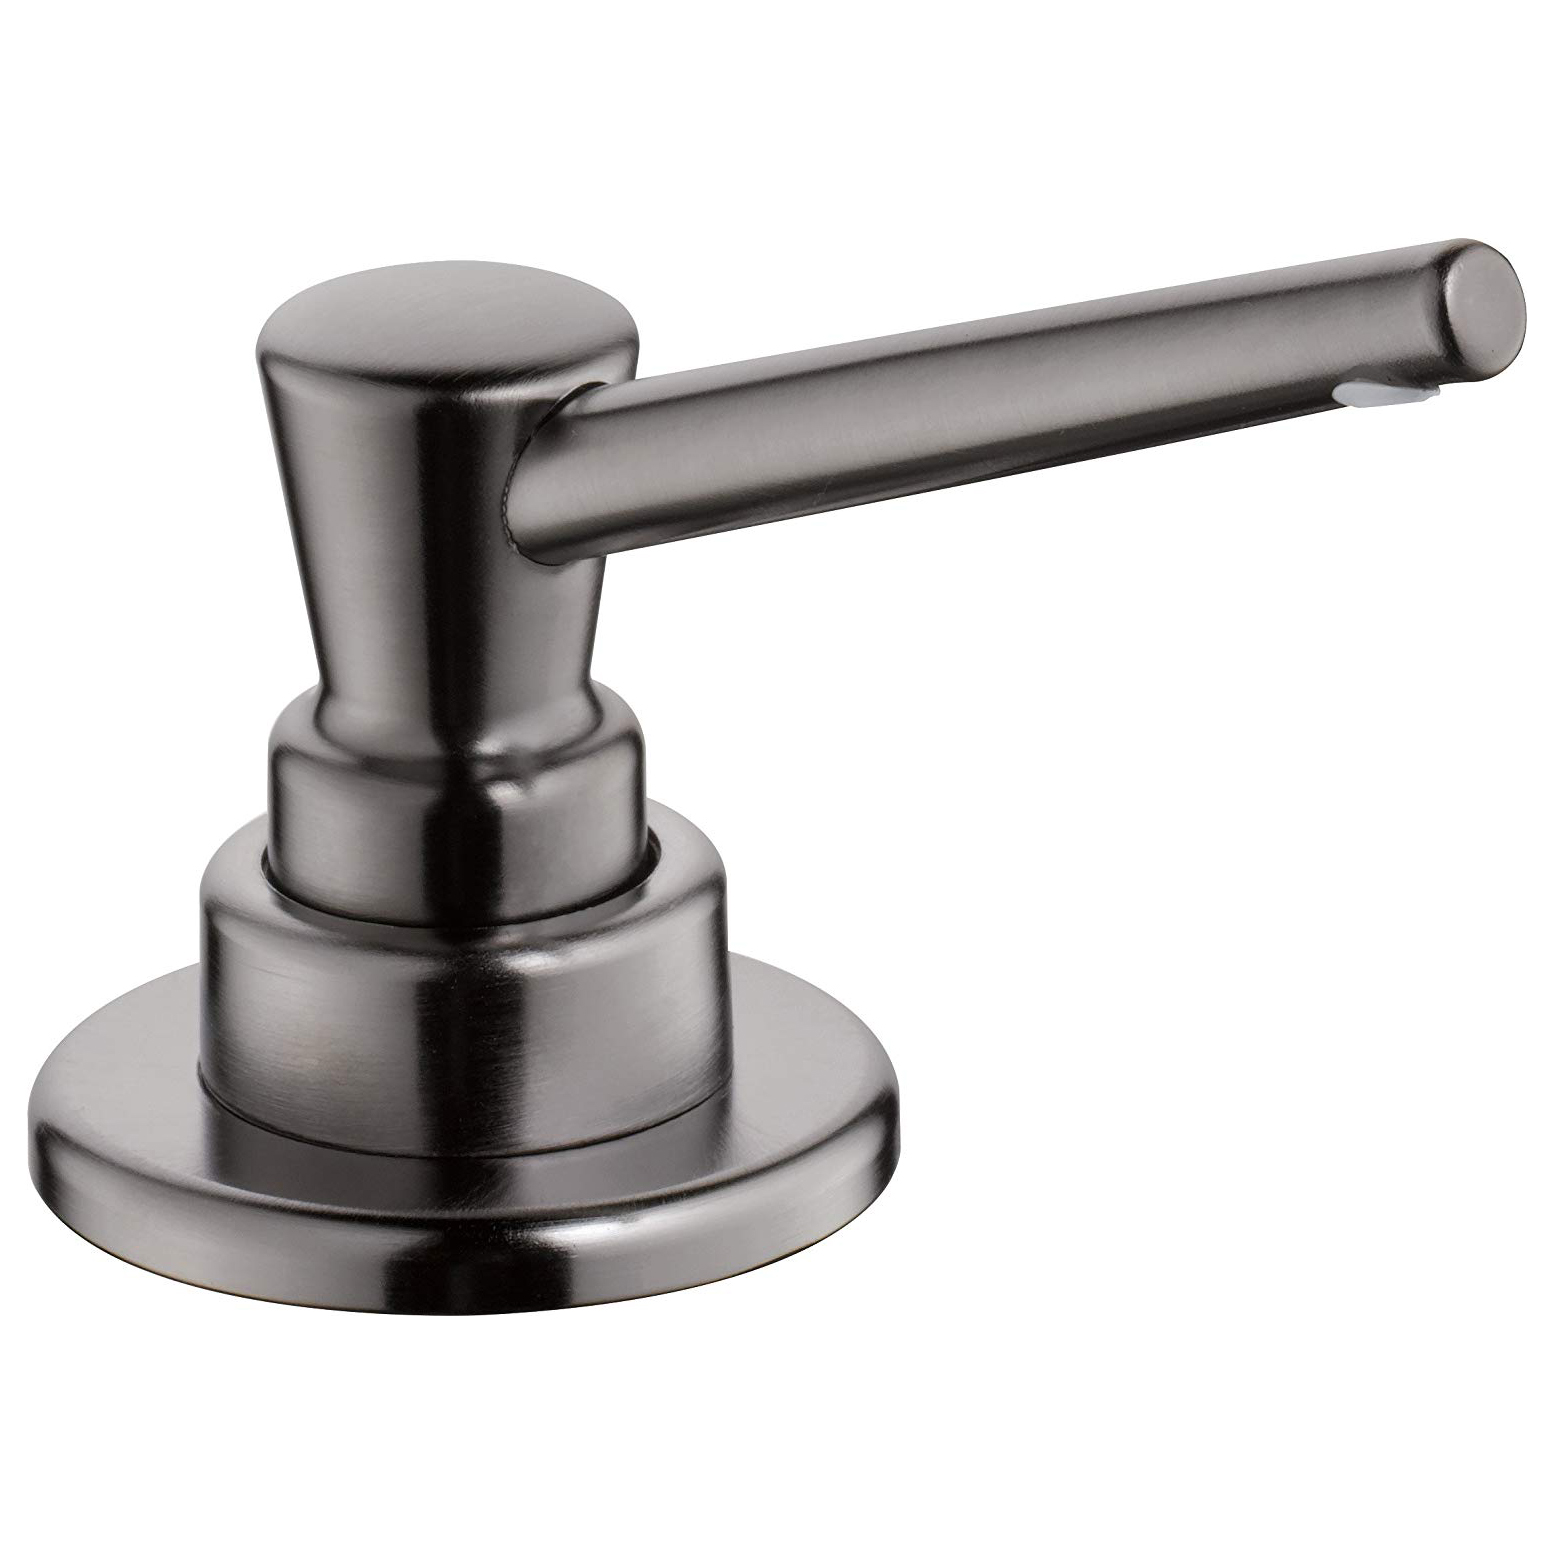 Signature Soap/Lotion Dispenser in Black Stainless